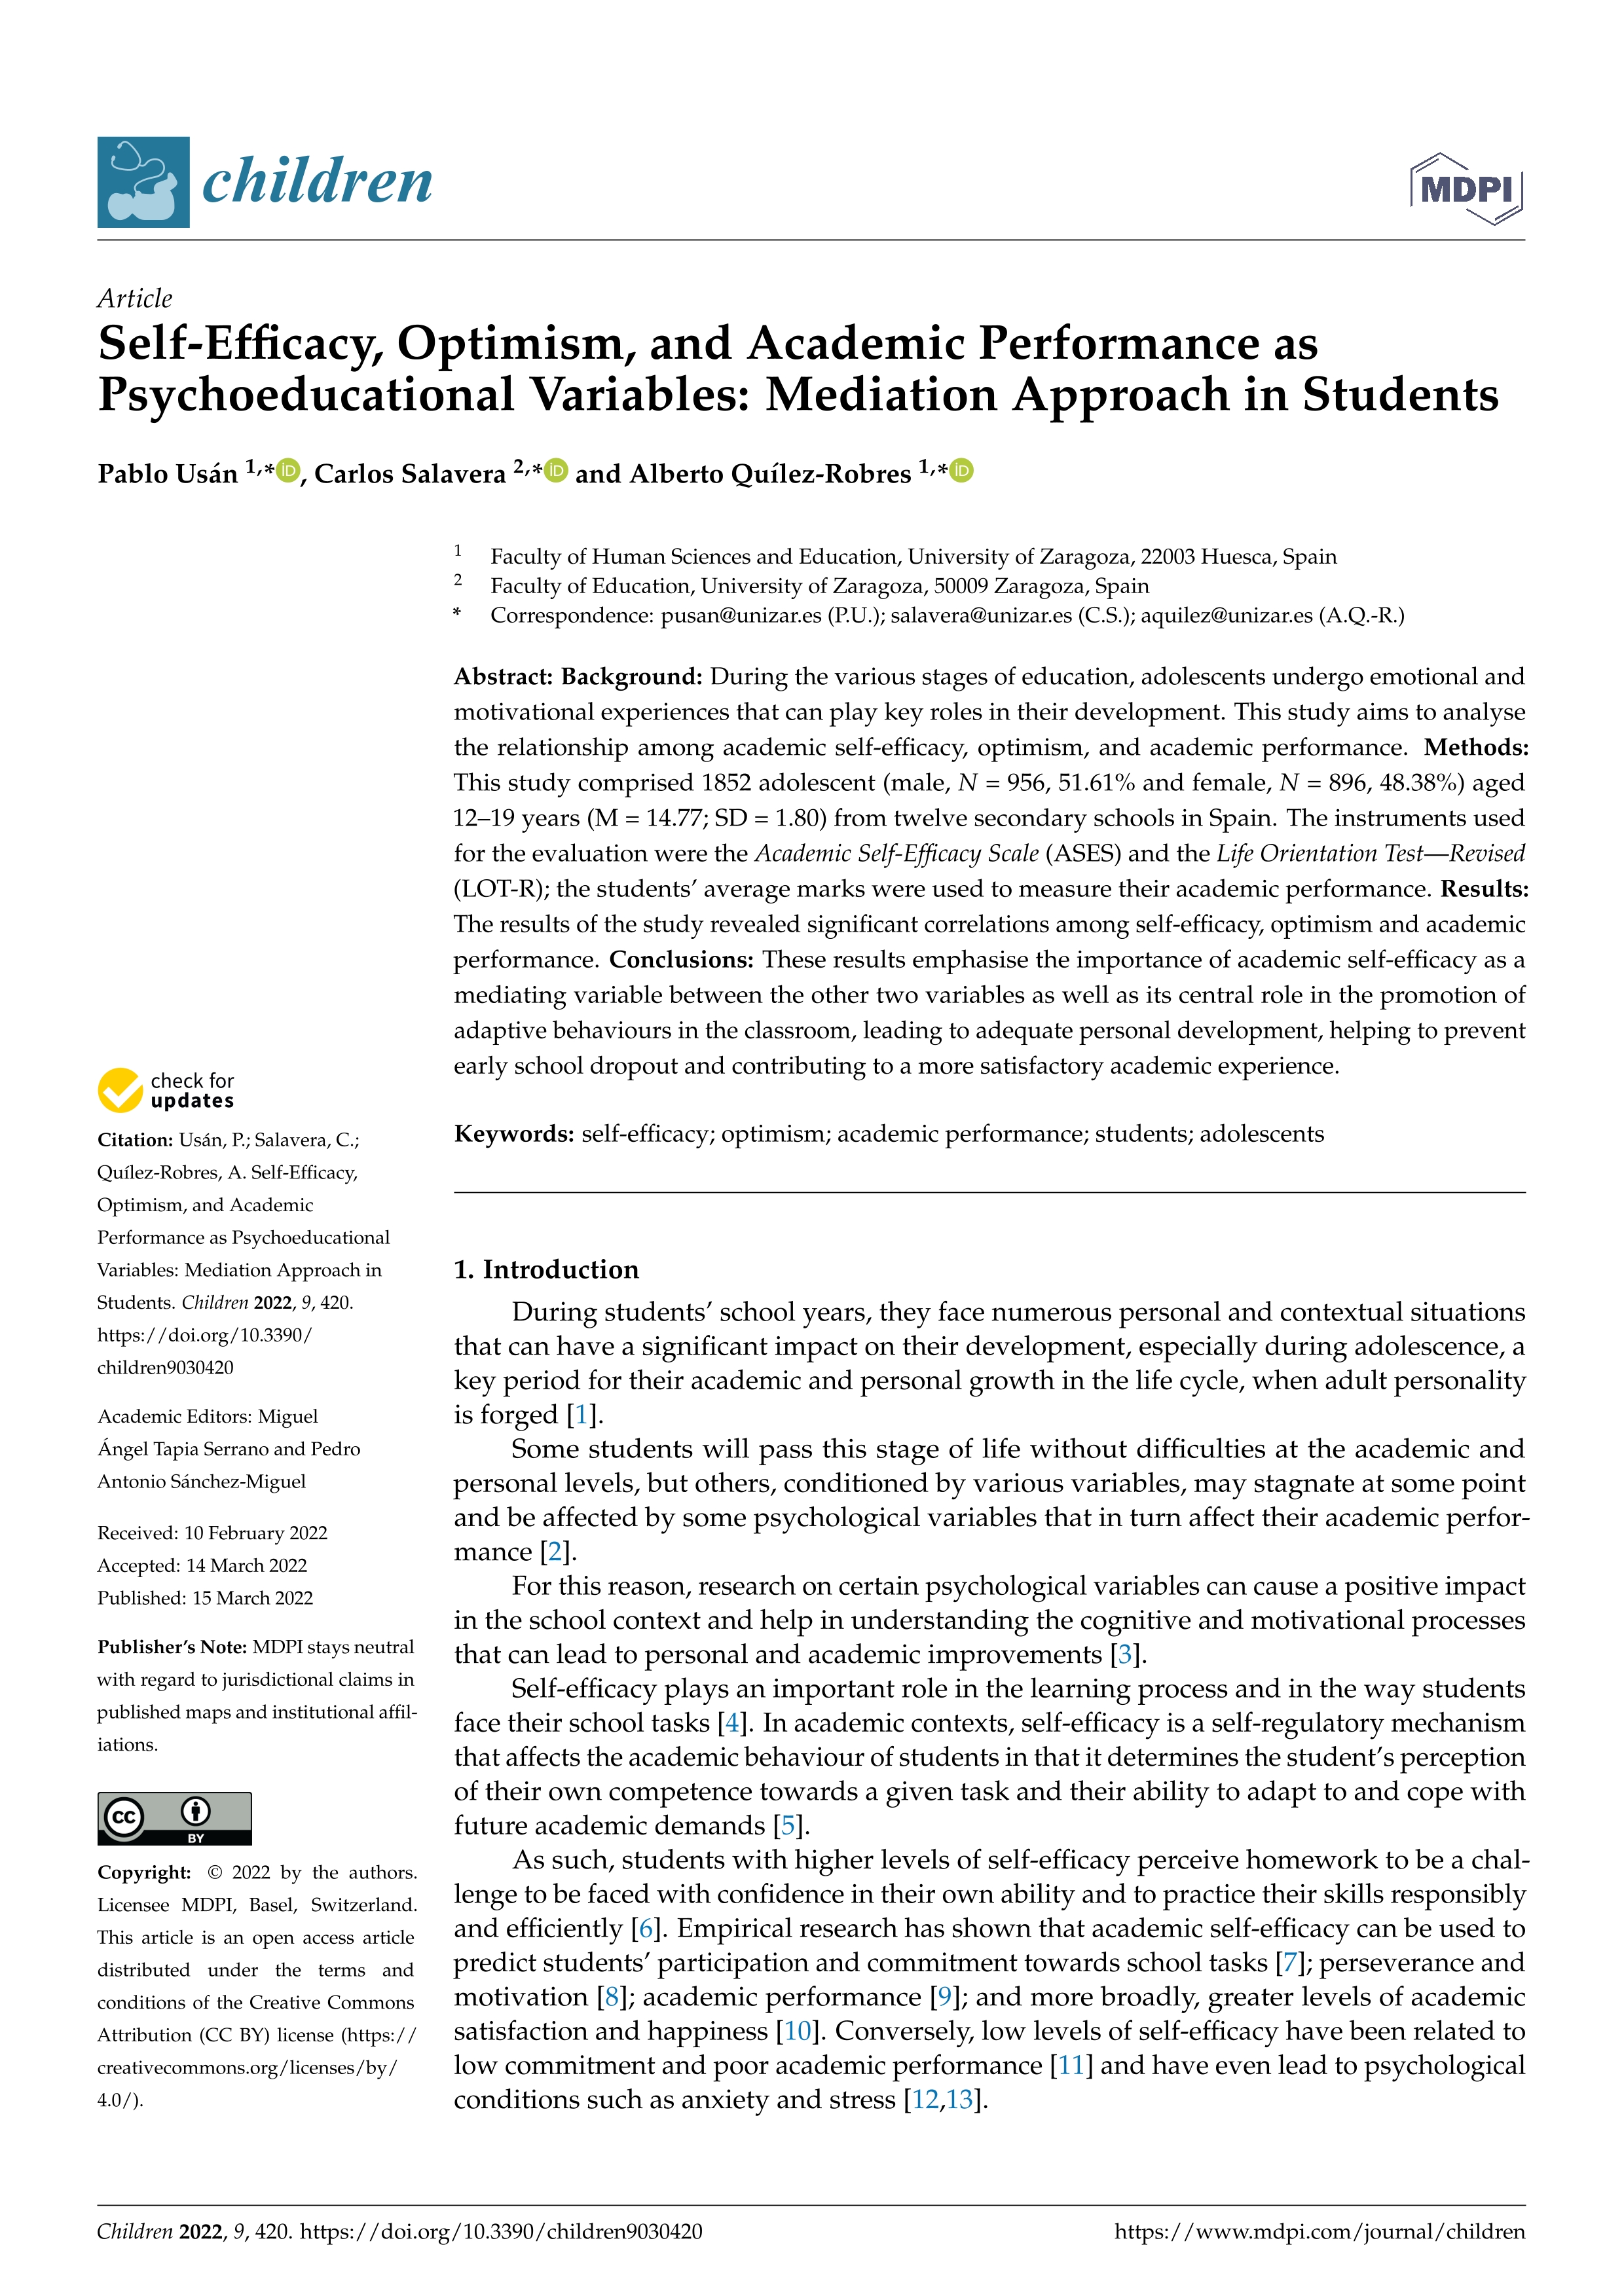 Self-efficacy, optimism, and academic performance as psychoeducational variables: mediation approach in students